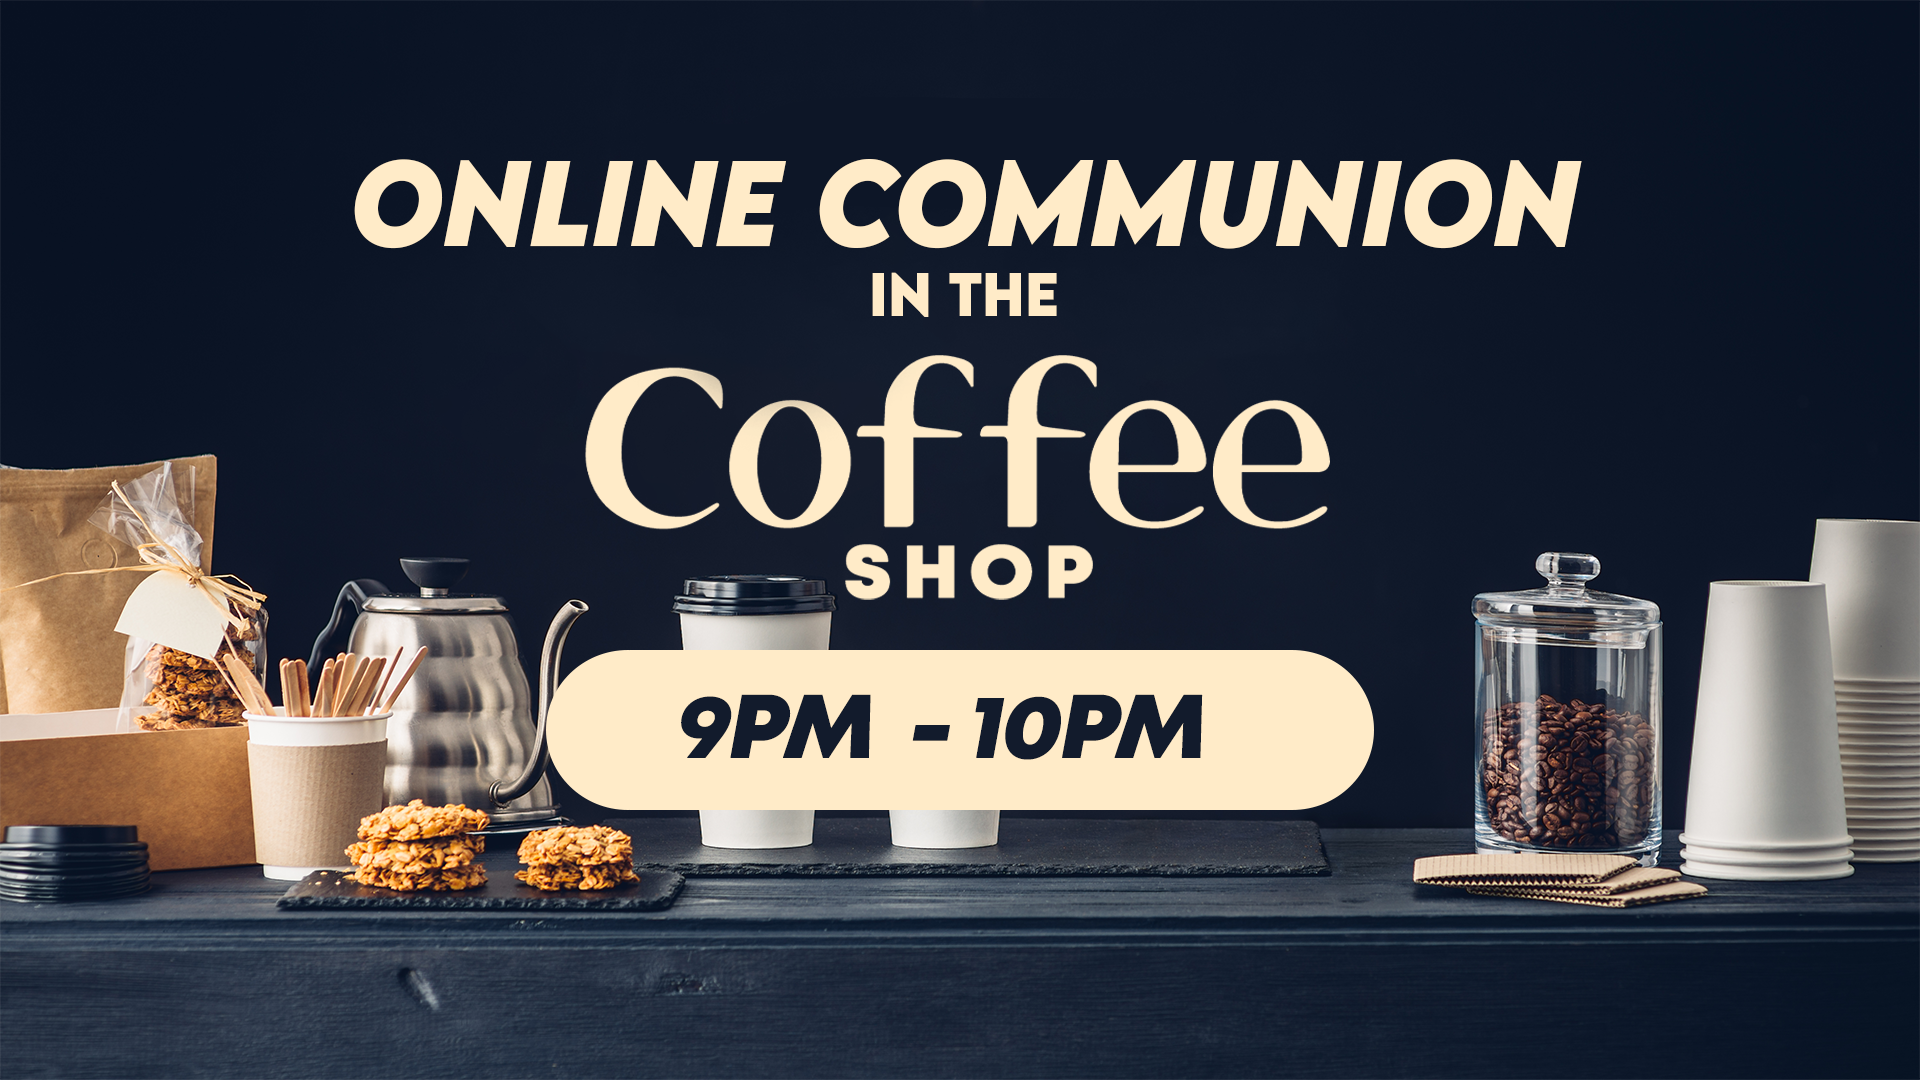 Online Communion in the Coffee Shop